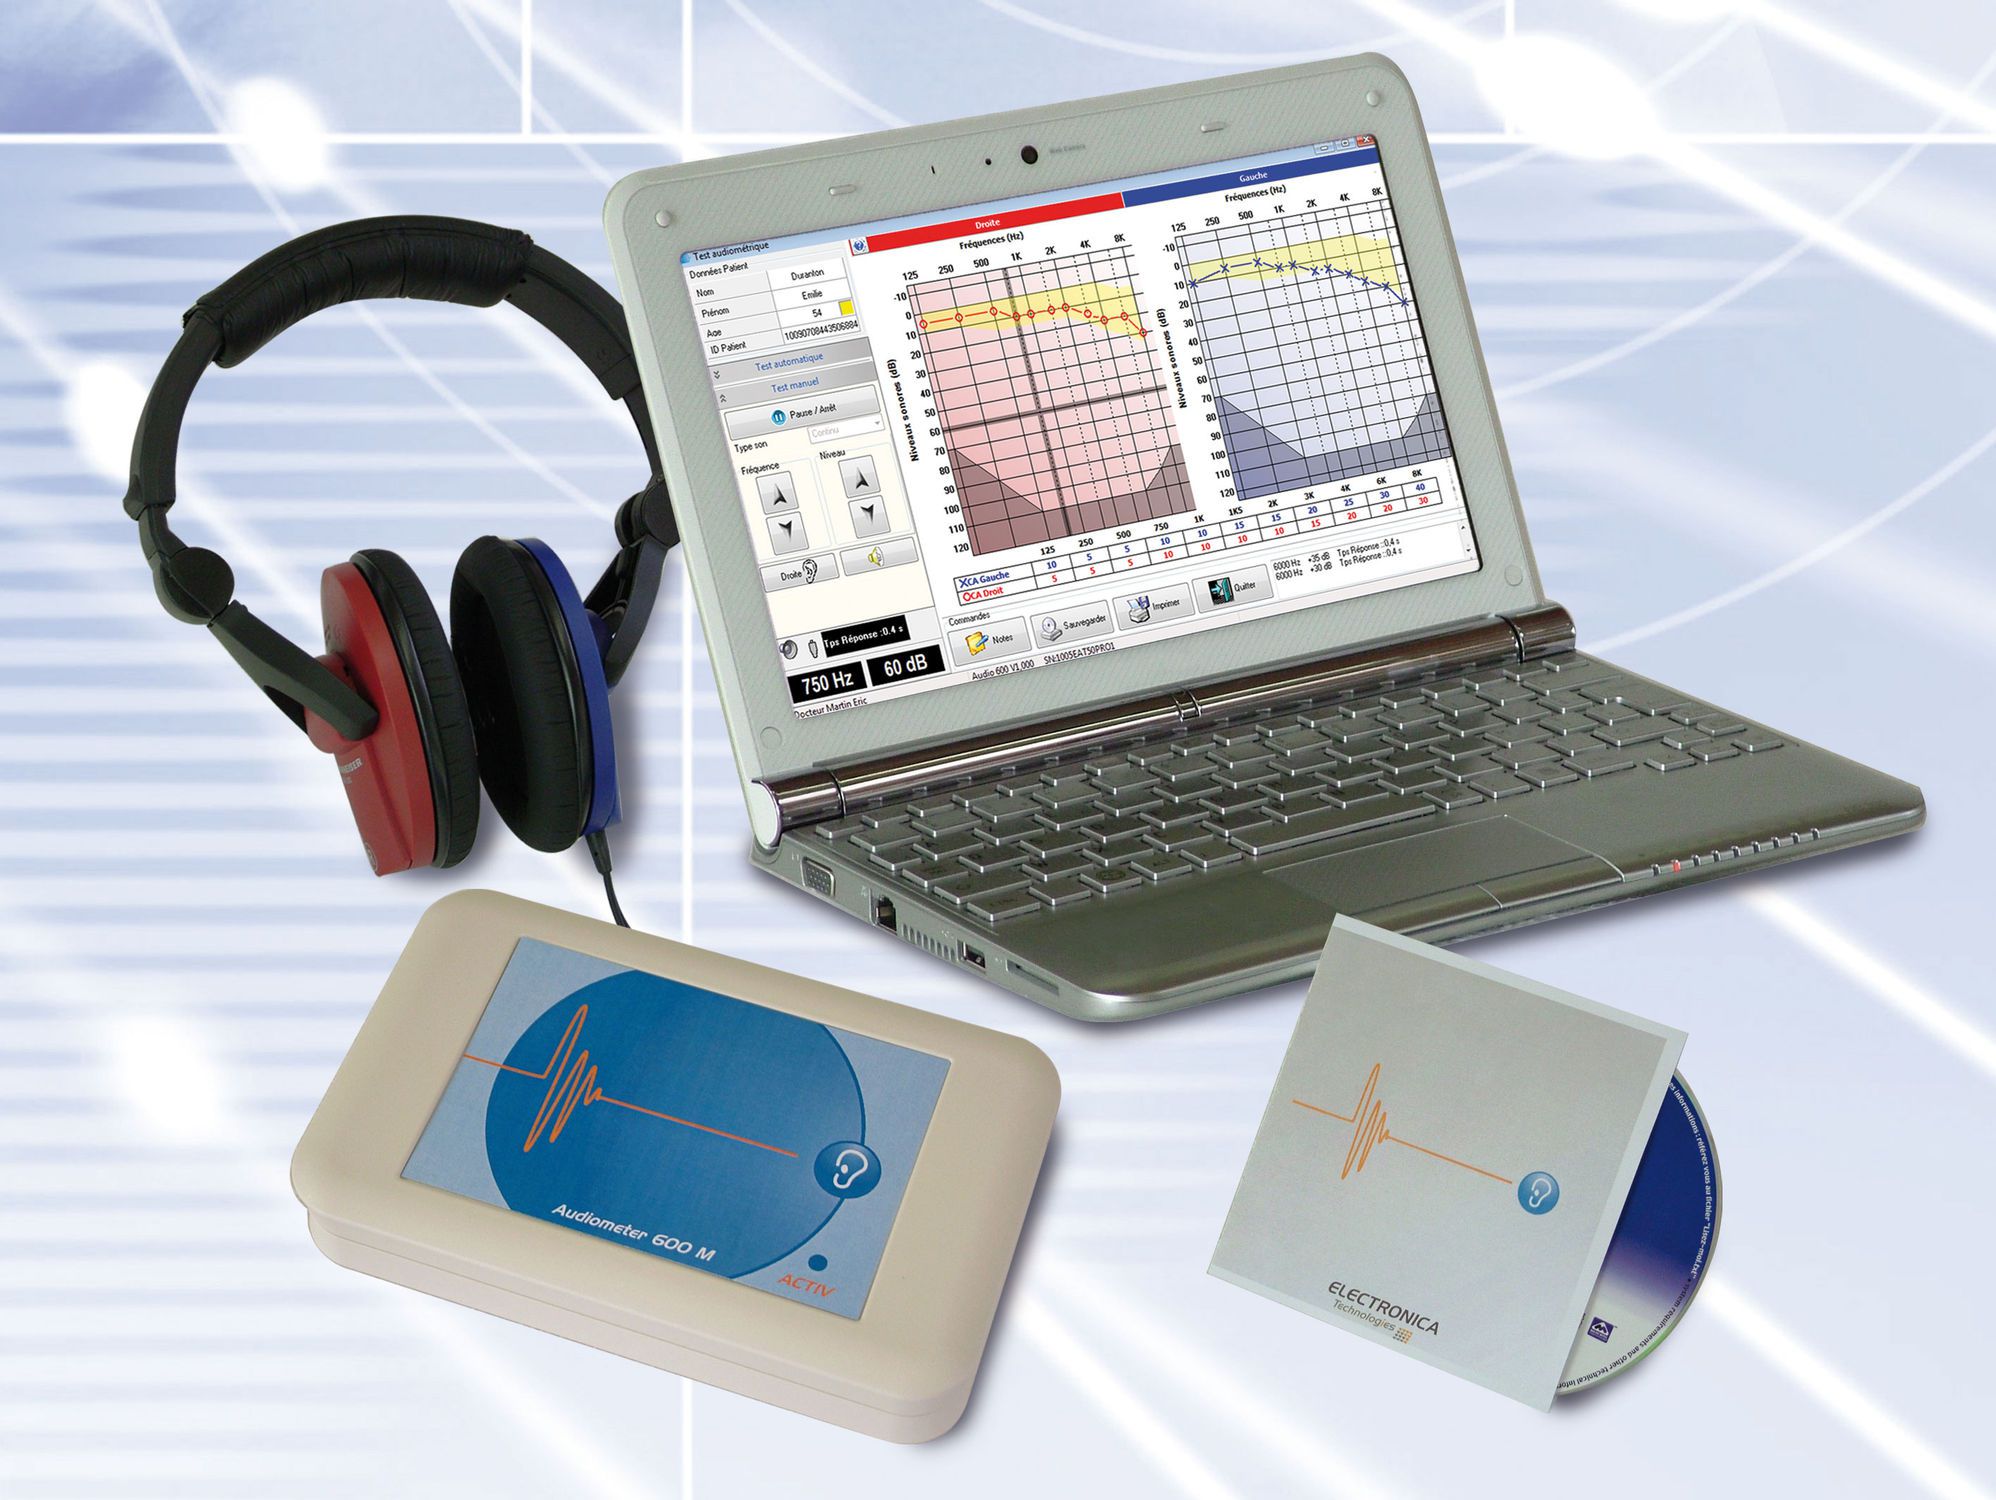 Audiometer (audiometry) / screening audiometer / computer-based 600M Electronica Technologies